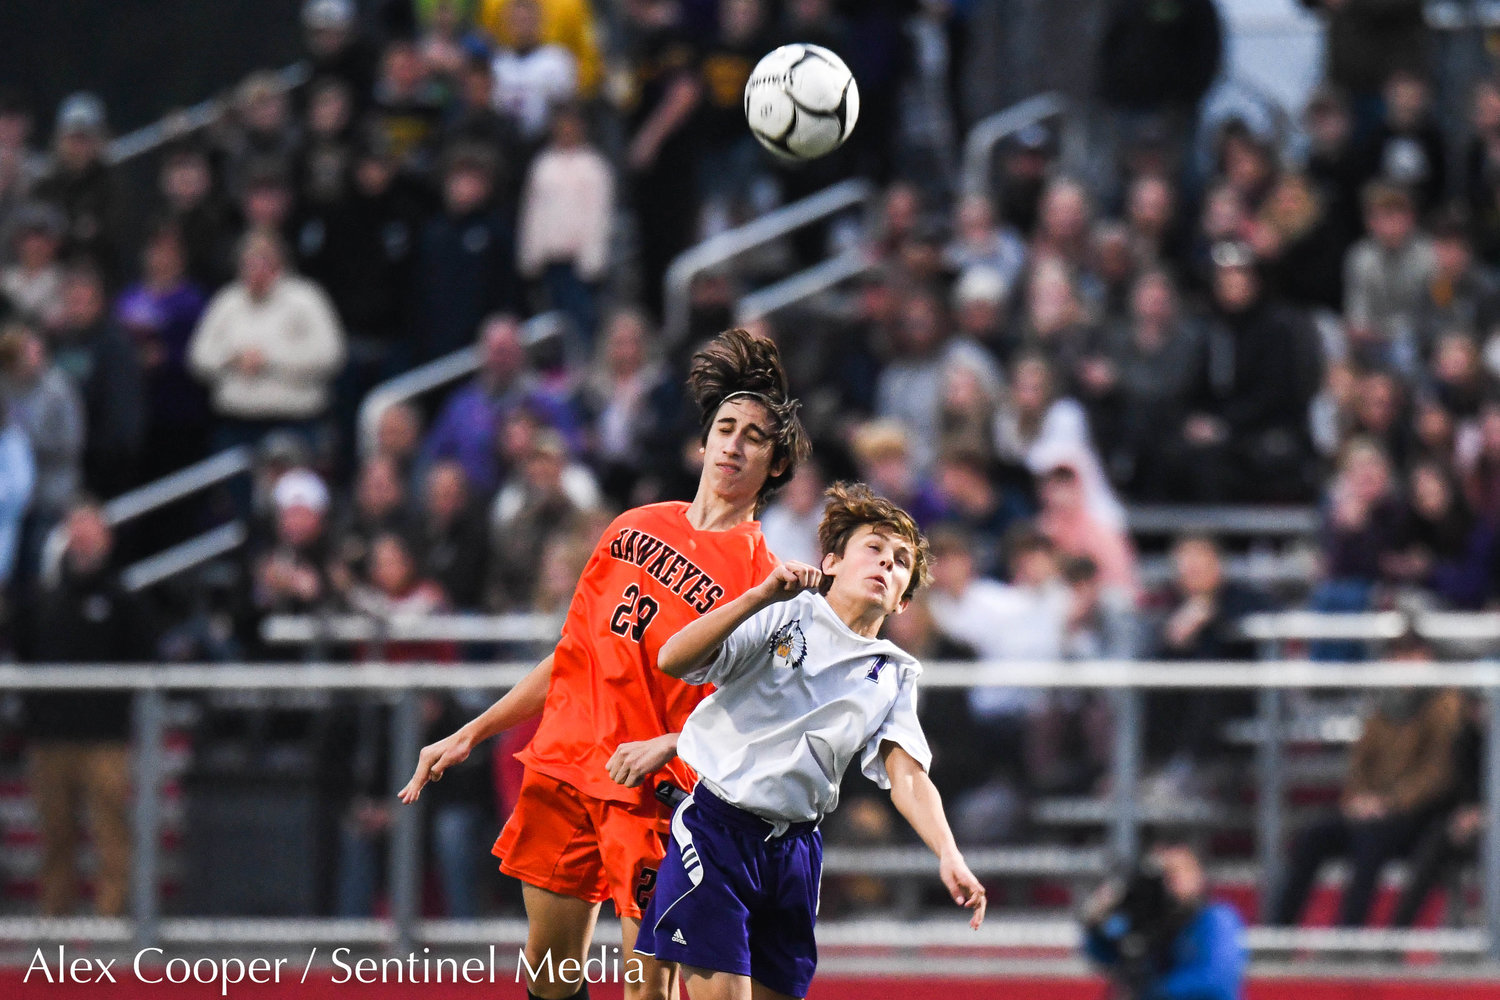 Cooperstown battles Waterville for the Section III Class C final on Tuesday, Nov. 1 at VVS High School. Cooperstown won 1-0 in overtime.